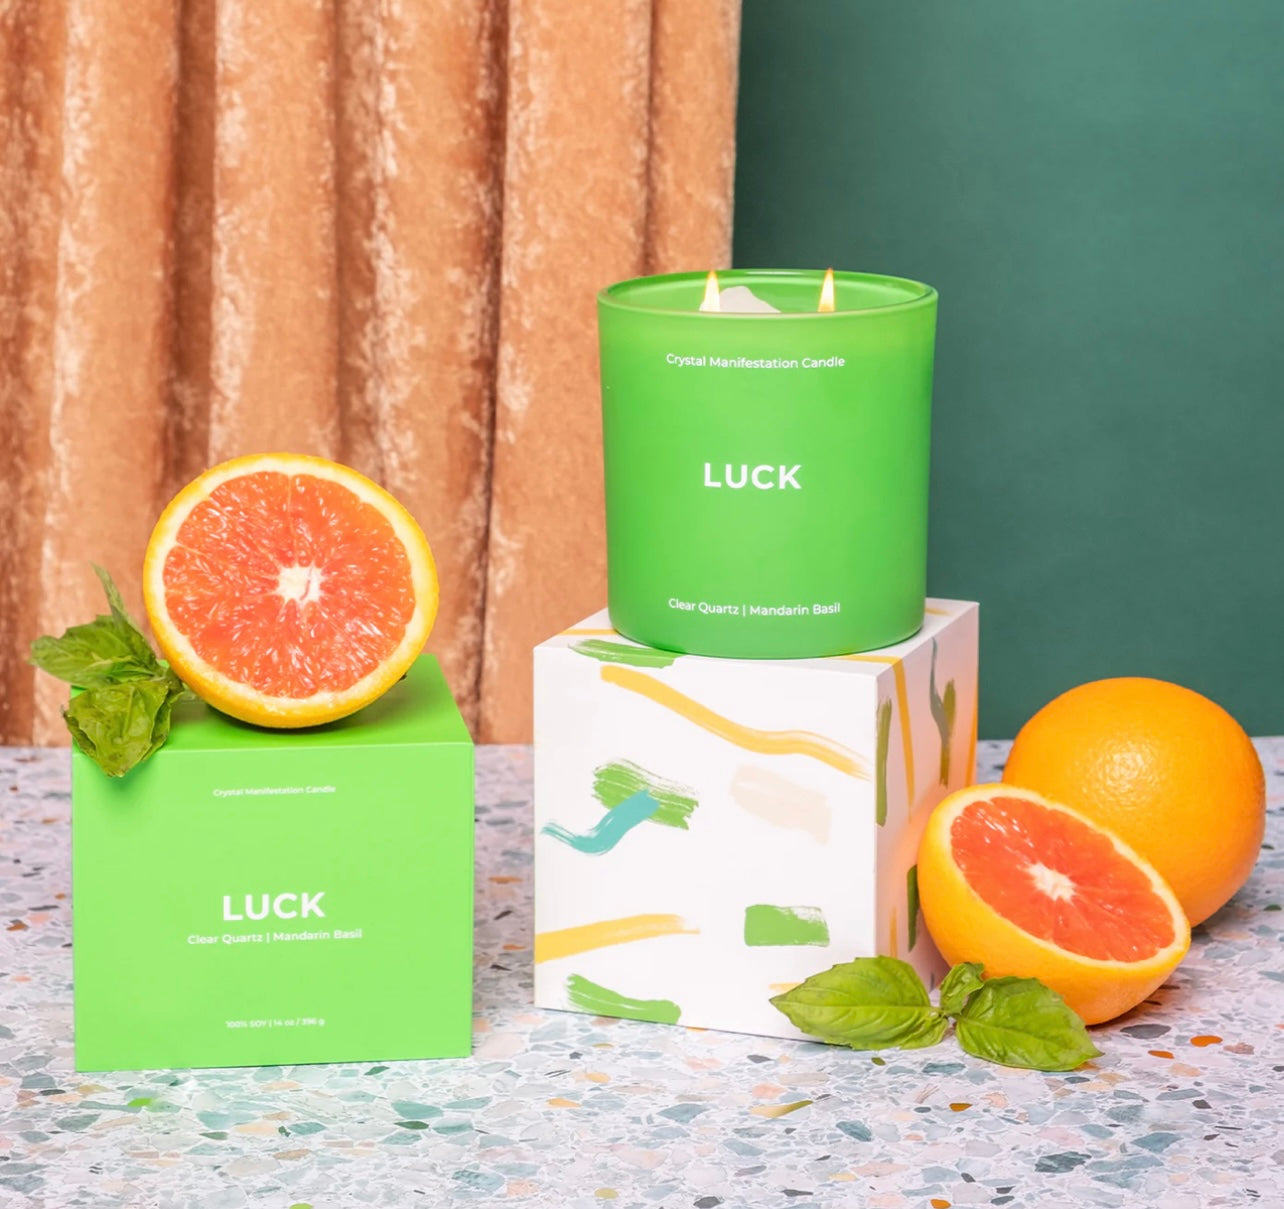 Jill & Ally Luck Crystal Manifestation Candle - Mandarin Basil Scented with Clear Quartz